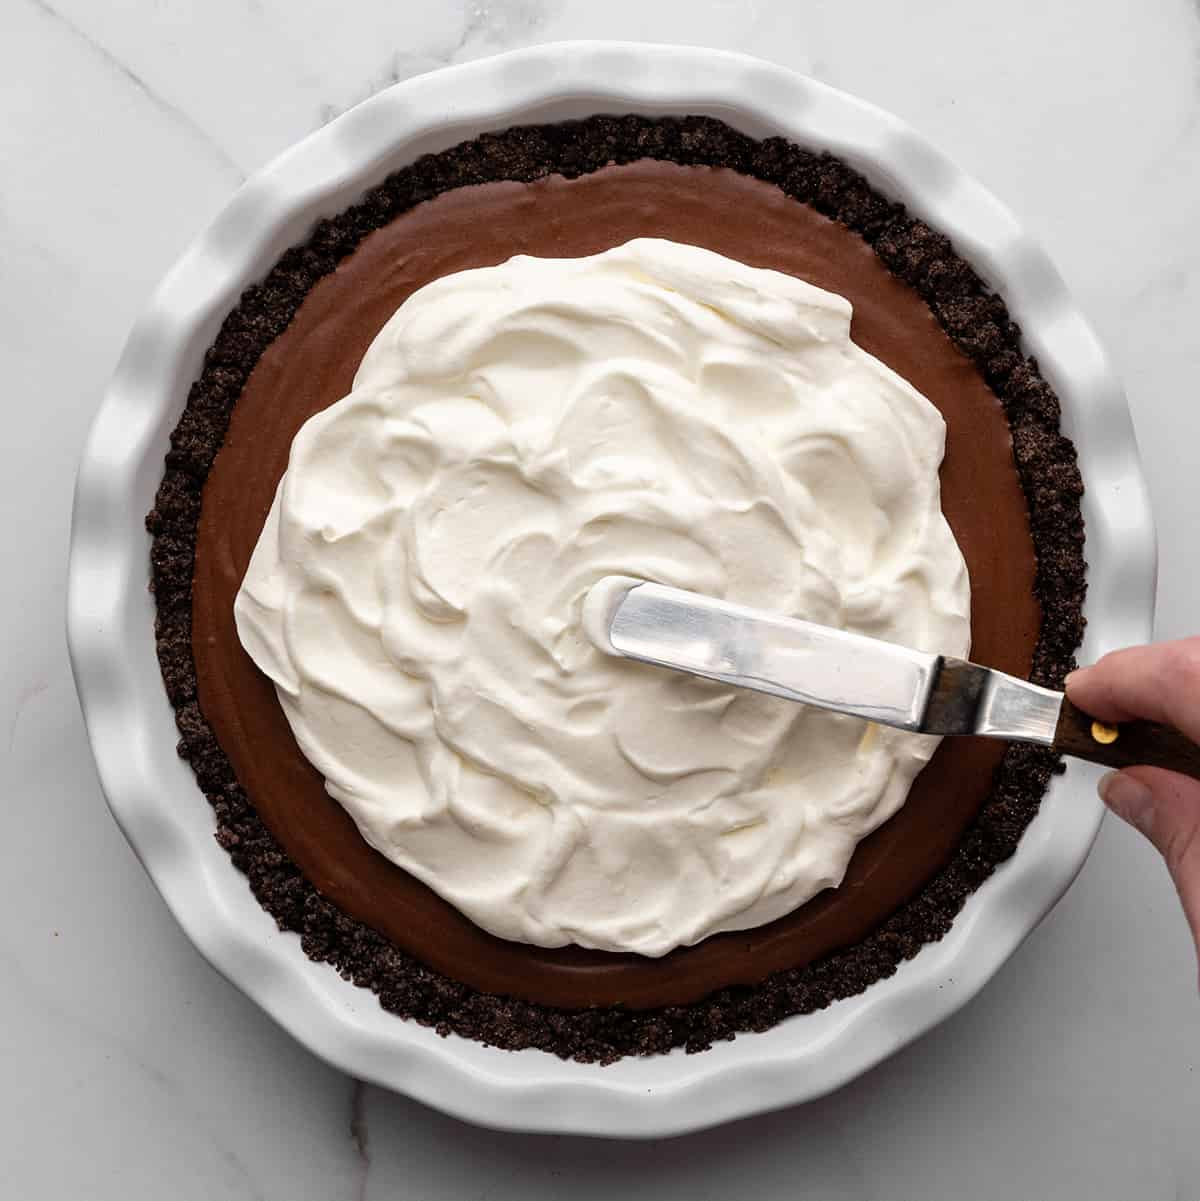 whipped cream being spread on top of the chocolate pudding pie filling